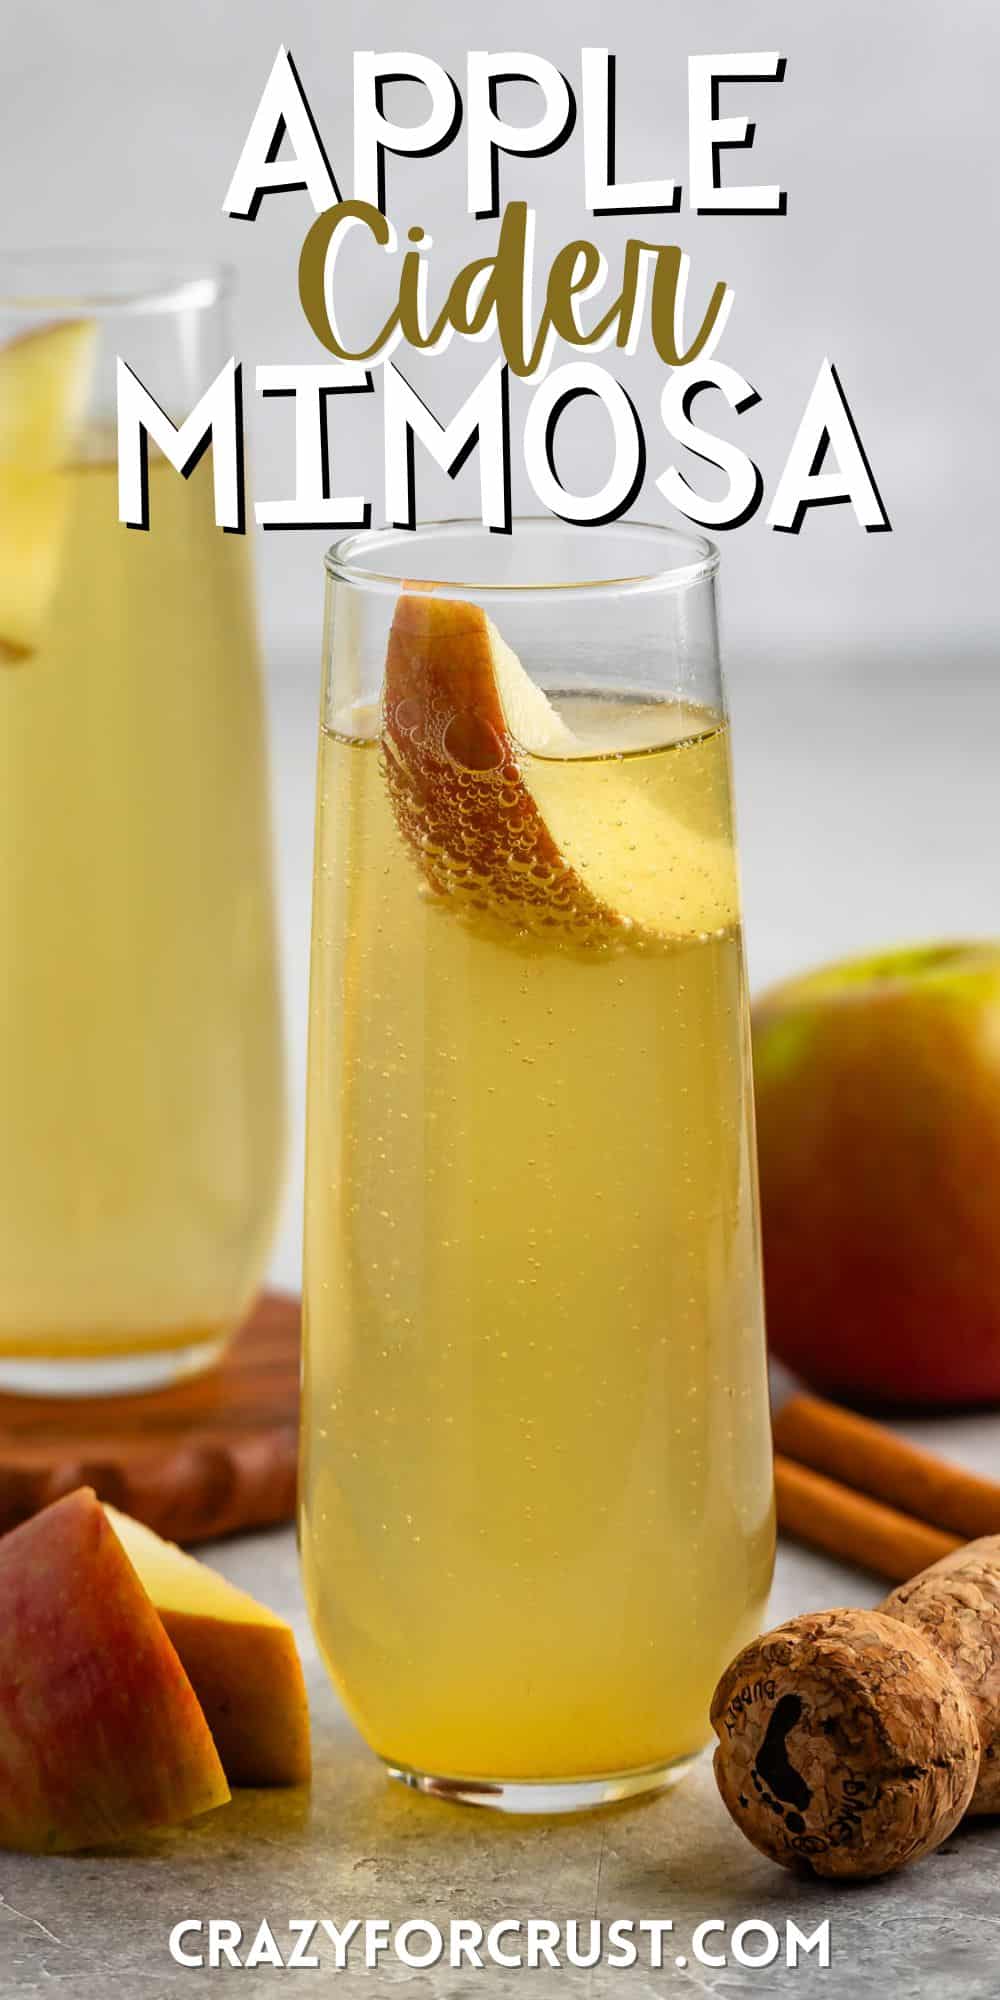 yellow drink in a tall clear glass with an apple slice in the glass with words on the image.